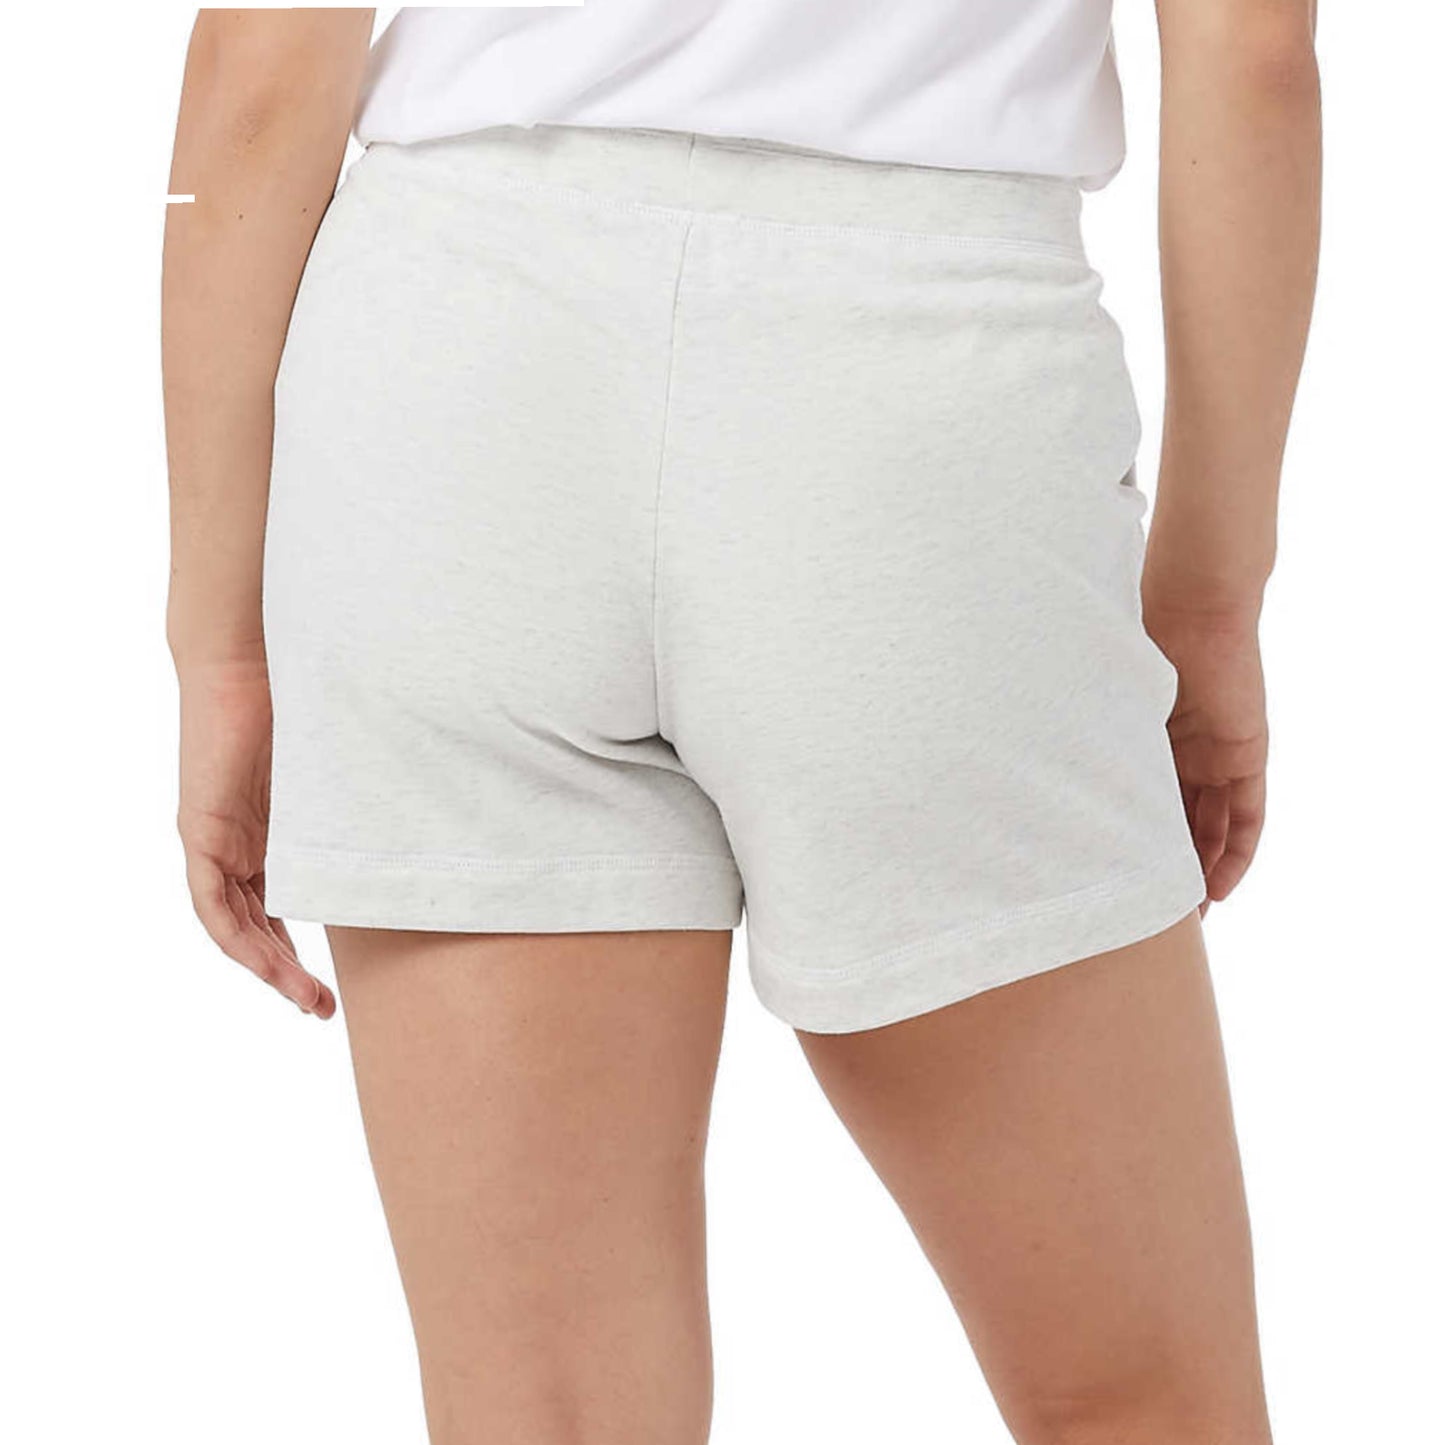 32 Degrees Women's 2-pack Ultra-soft Cotton Blend Jersey Casual Active Shorts